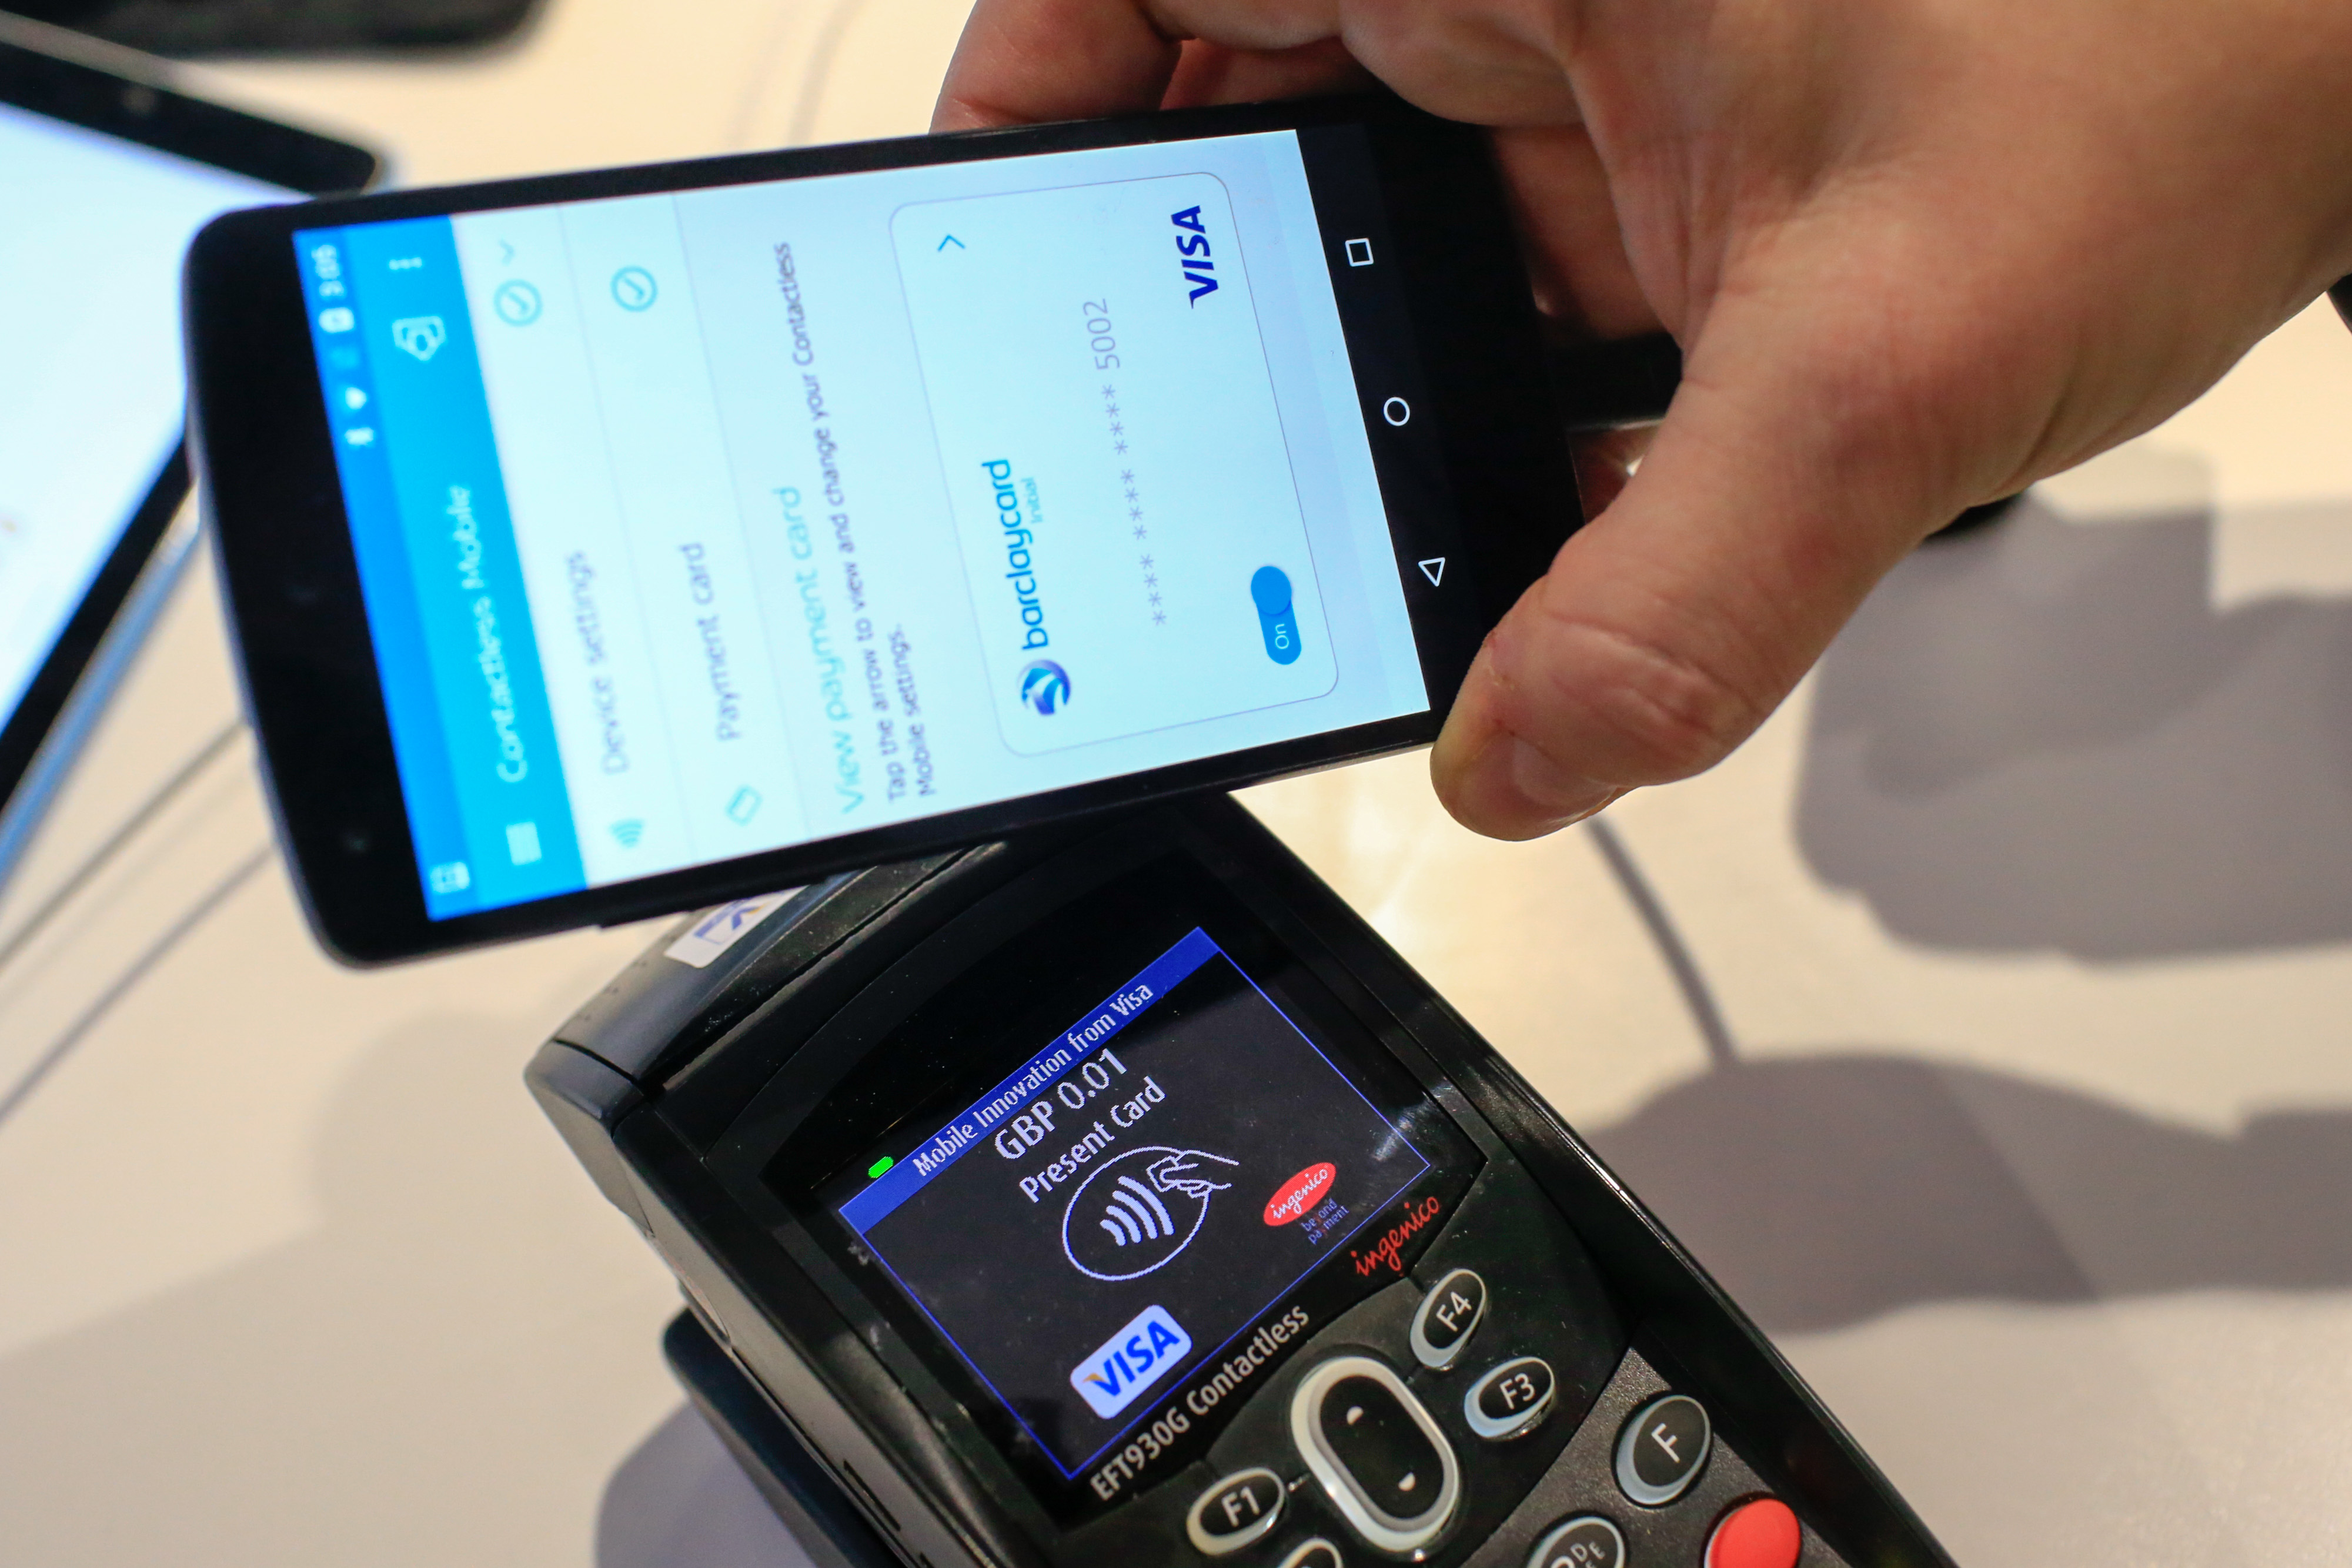 IBM and Visa Want to Turn Your Shoes Into a Mobile Payment System